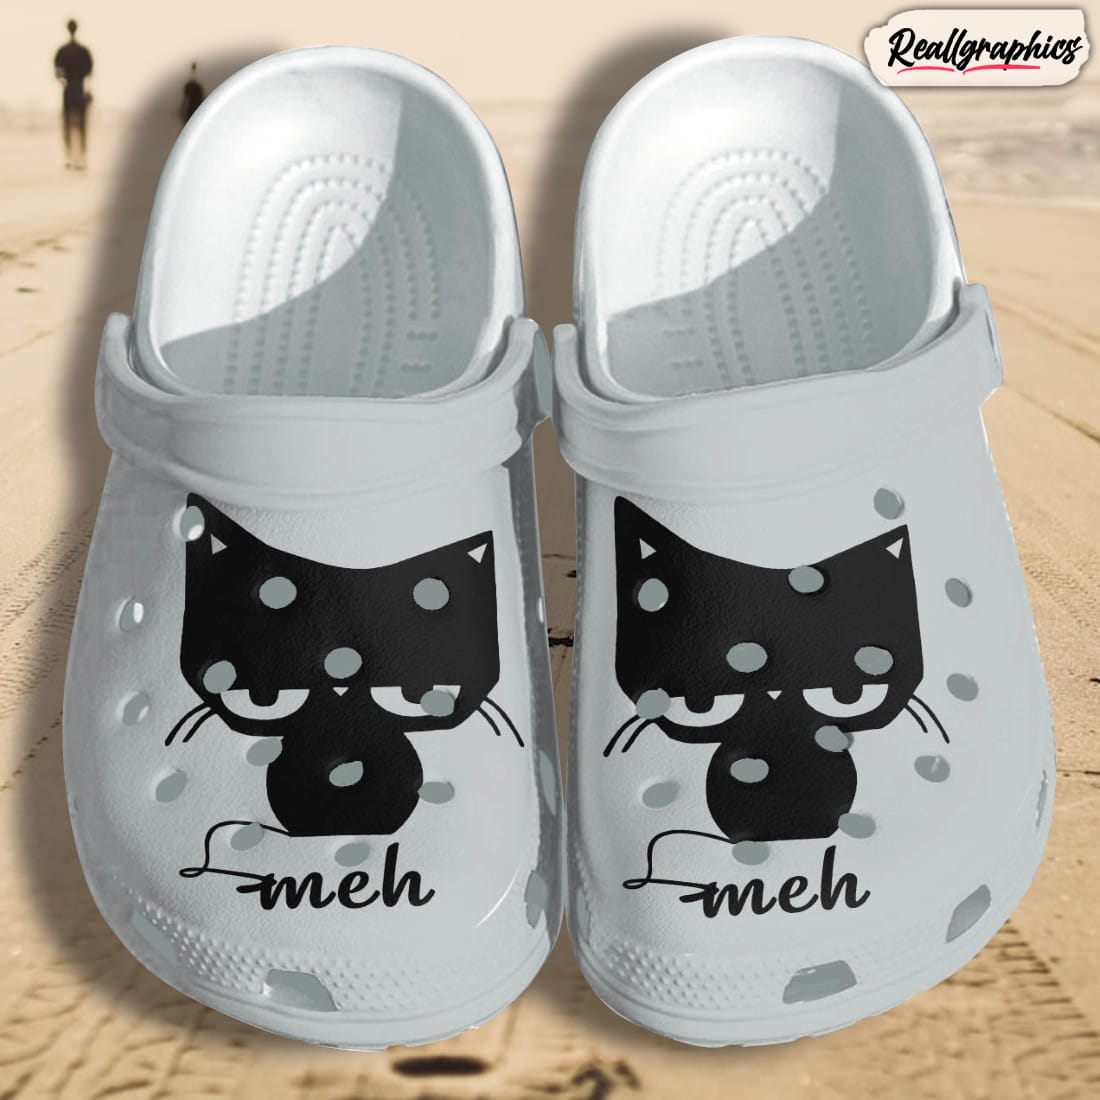 anime black cat meh meh funny outdoor shoes crocs, cat cute love custom shoes crocs gifts